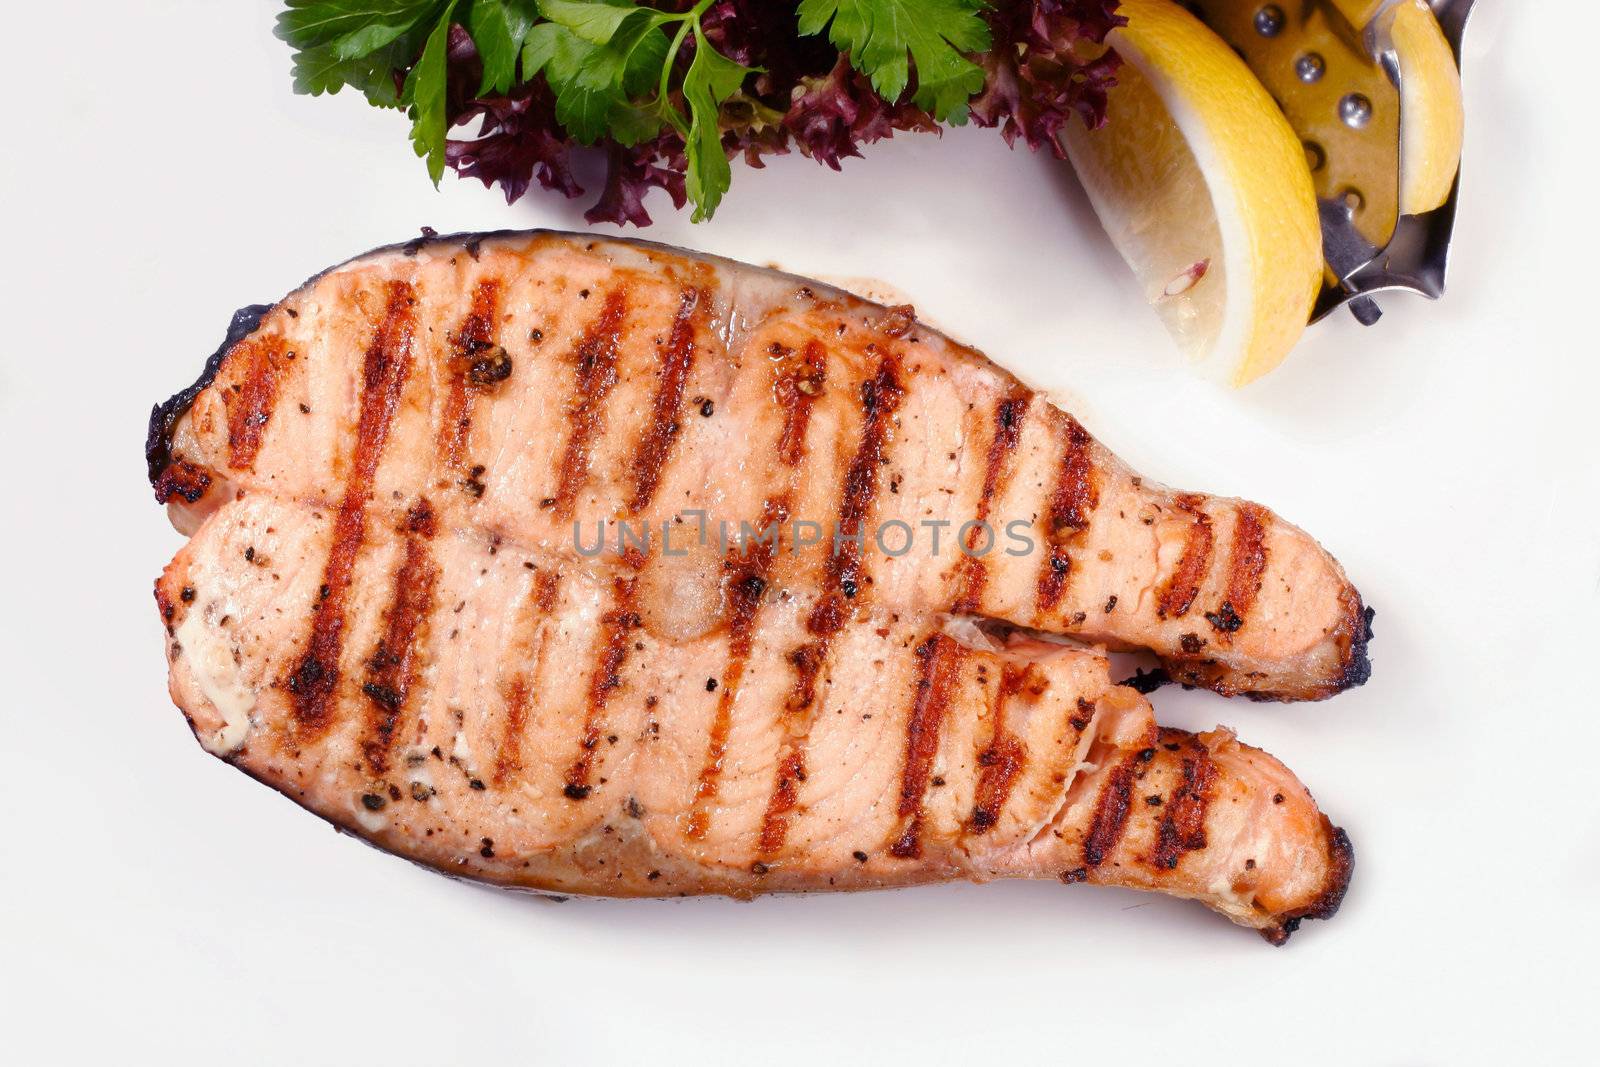 Grilled salmon steak with salad and lemon by igor_stramyk